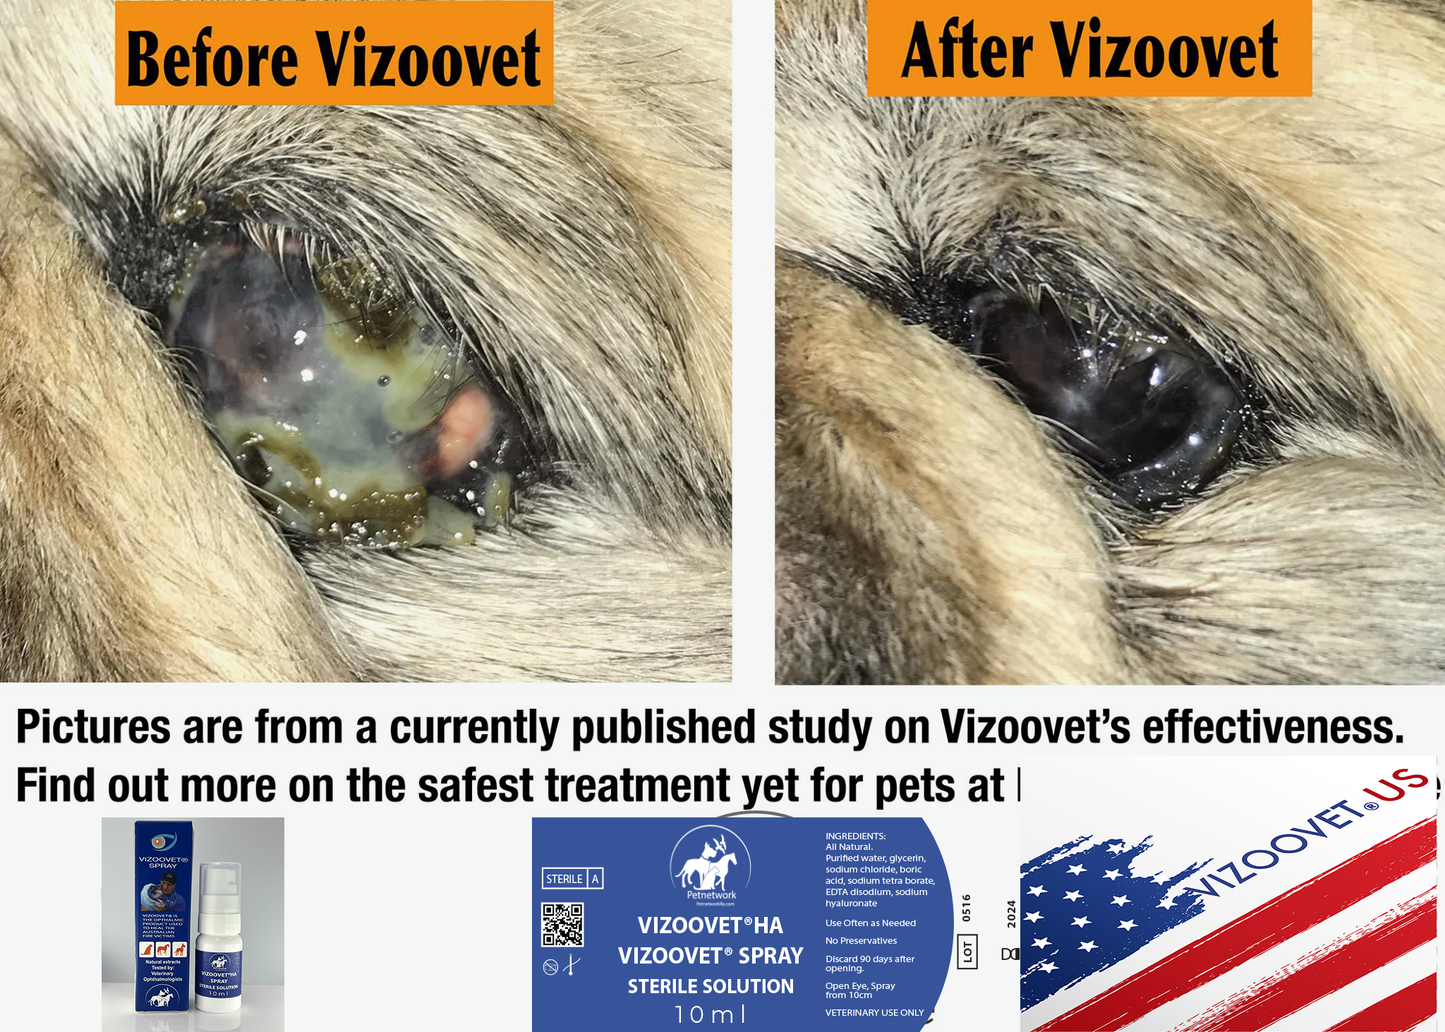 Vizoovet lubricating-Protective-Soothing-Eye Drops for Pets, Long Lasting Relief